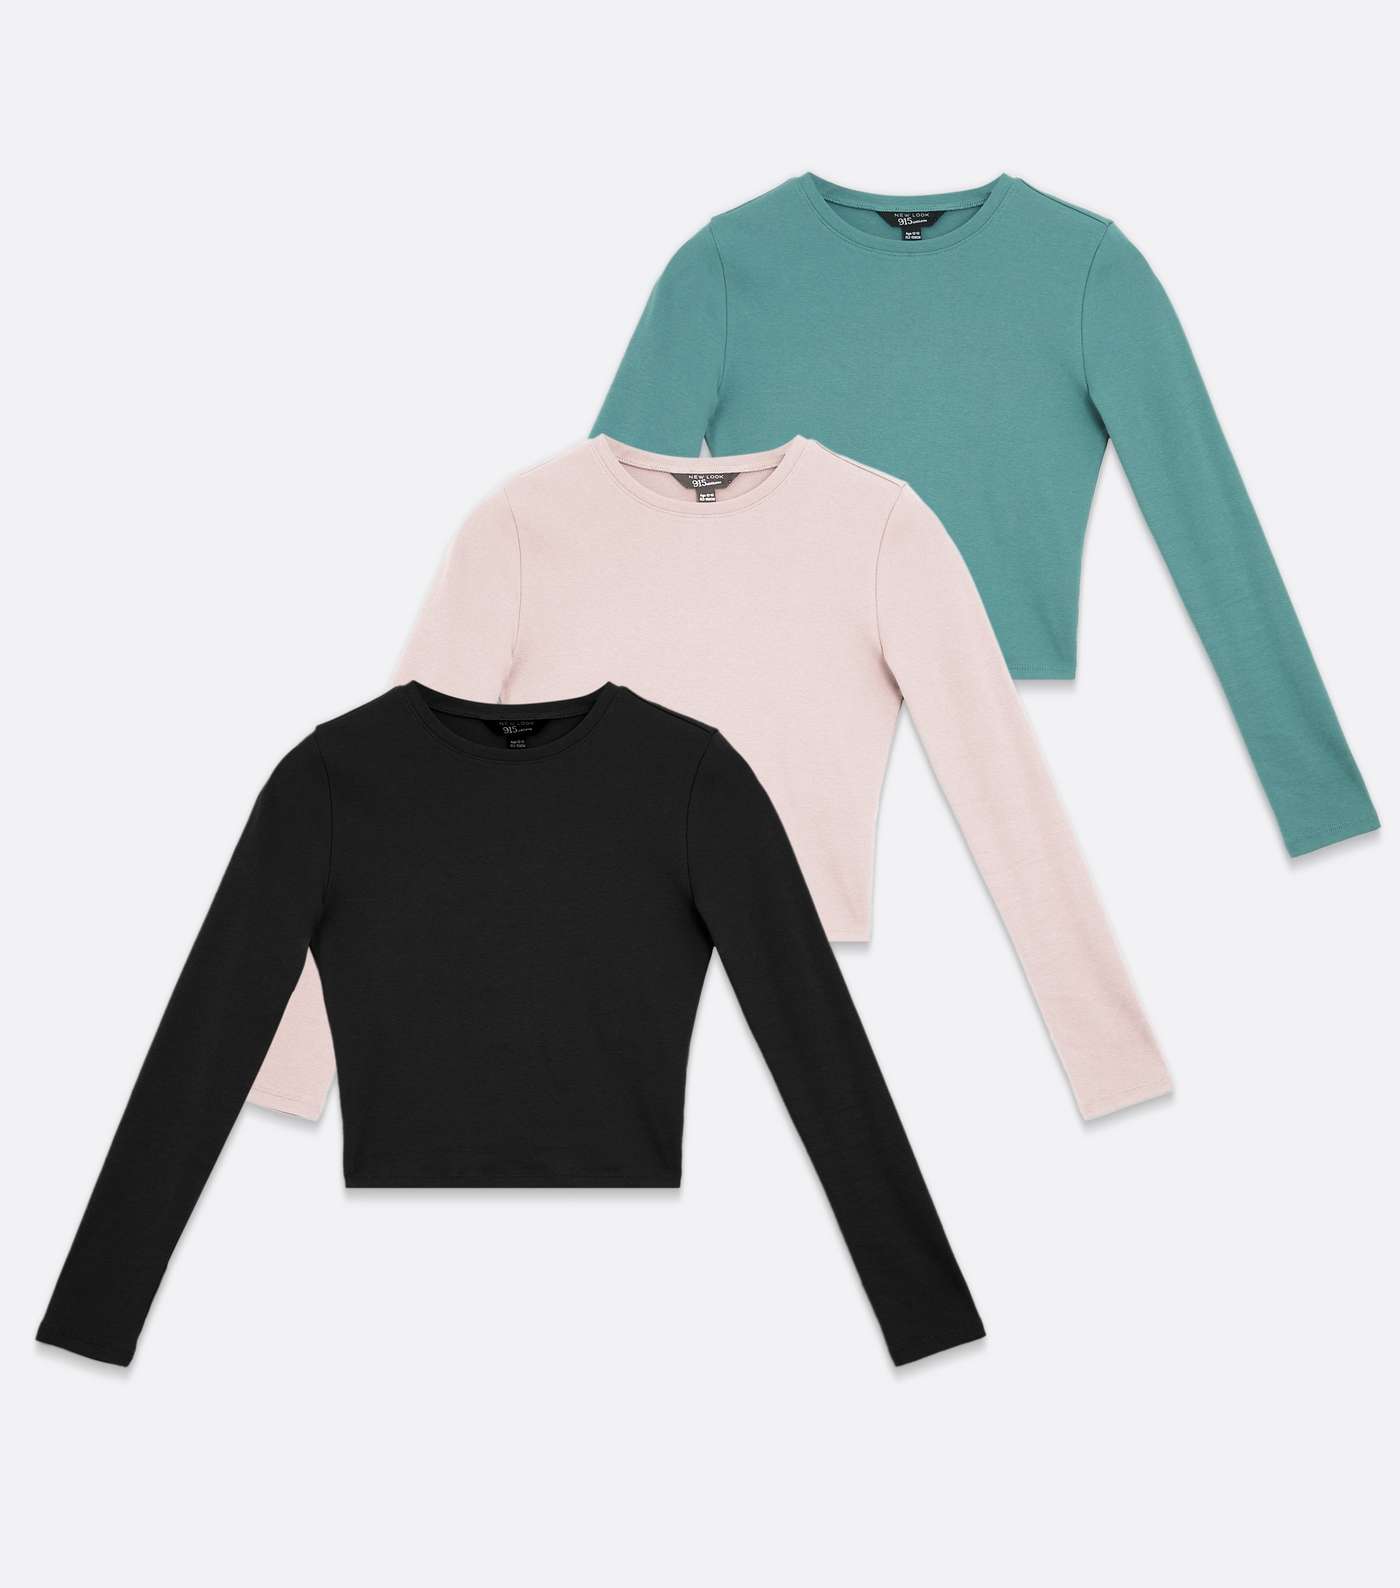 Girls 3 Pack Green Pink and Black Long Sleeve Tops Image 5